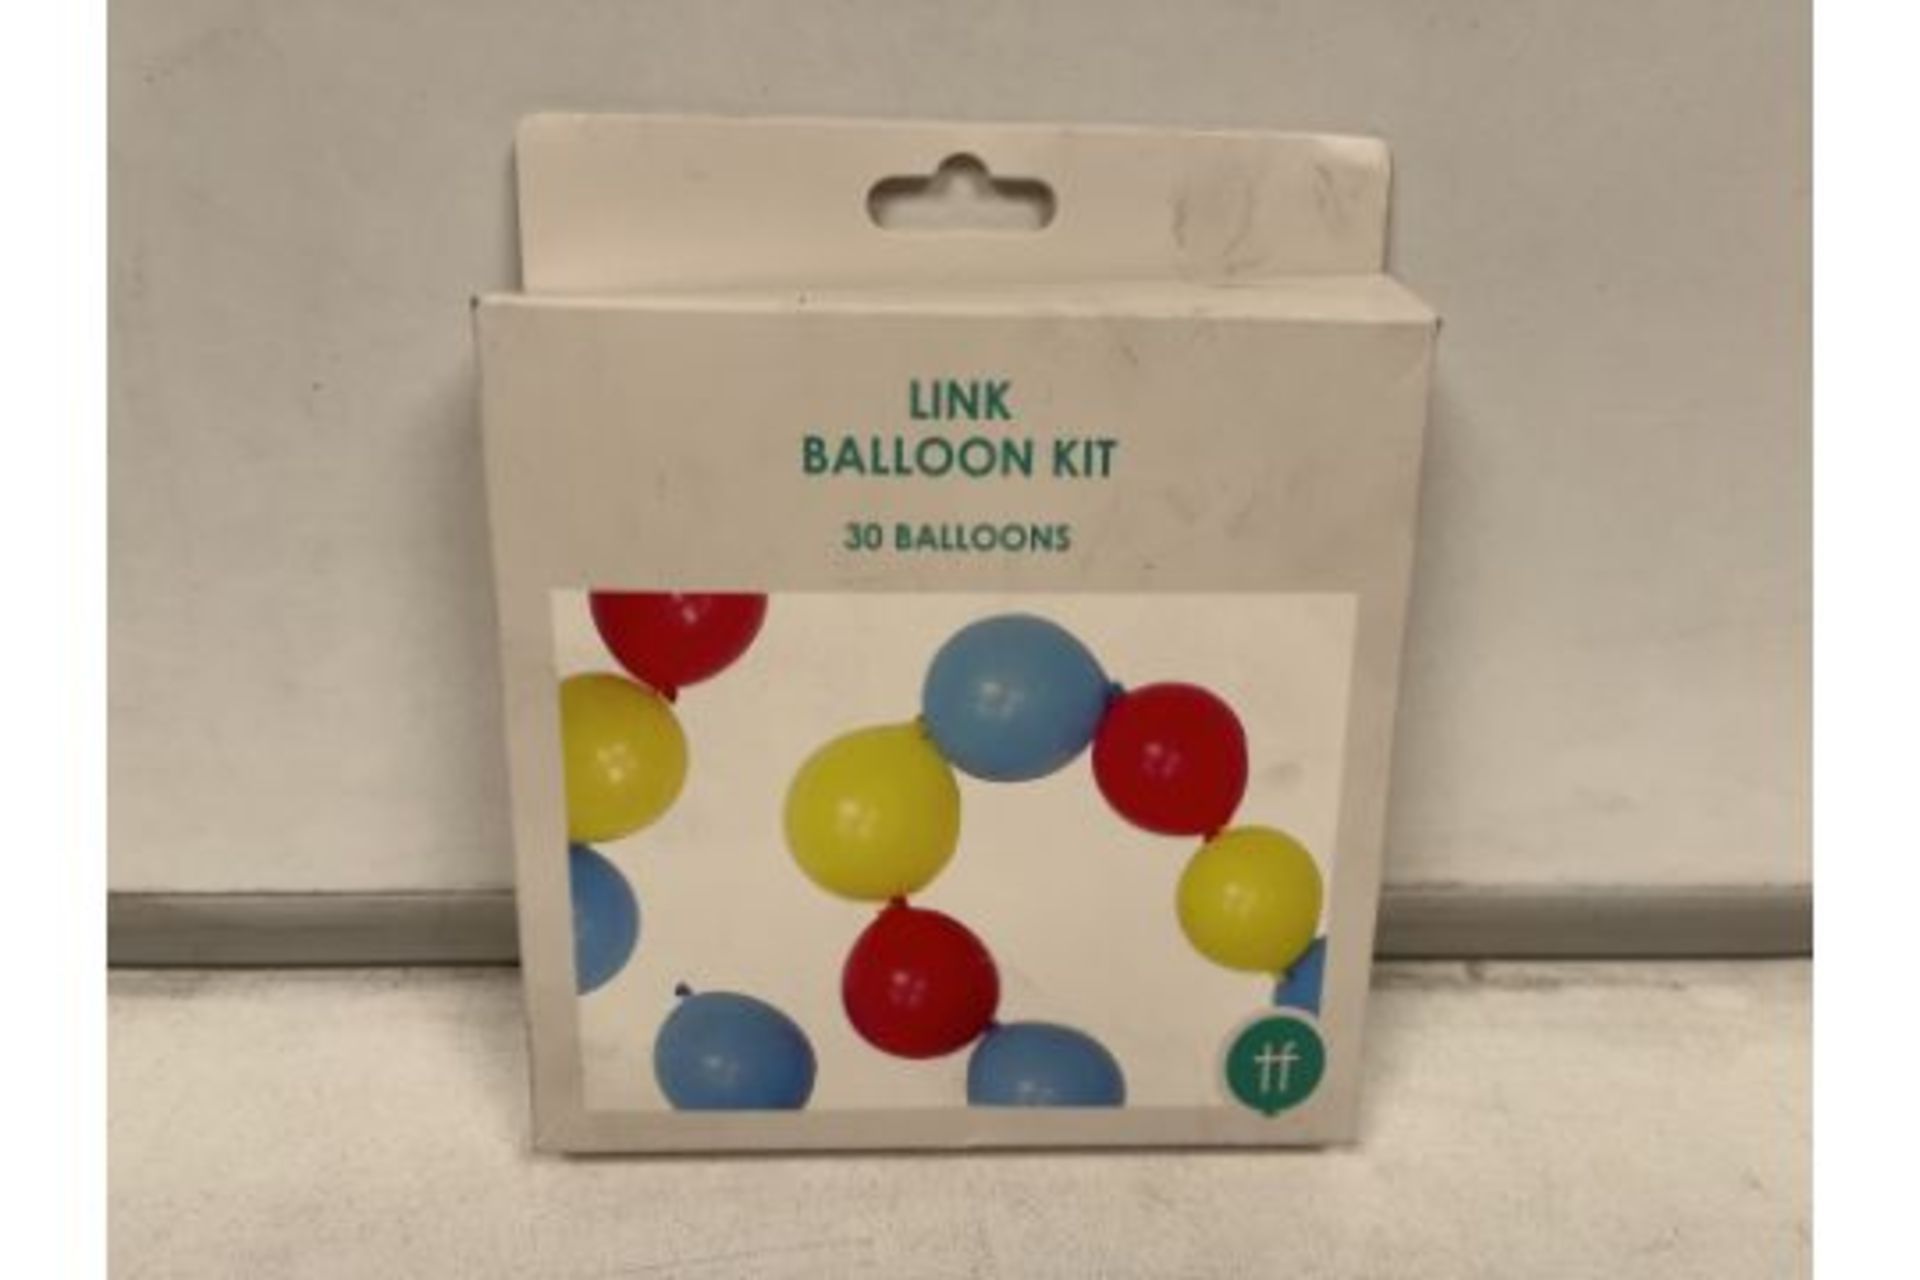 30 X BRAND NEW PACKS OF 30 LINK BALLOON KITS R15-12